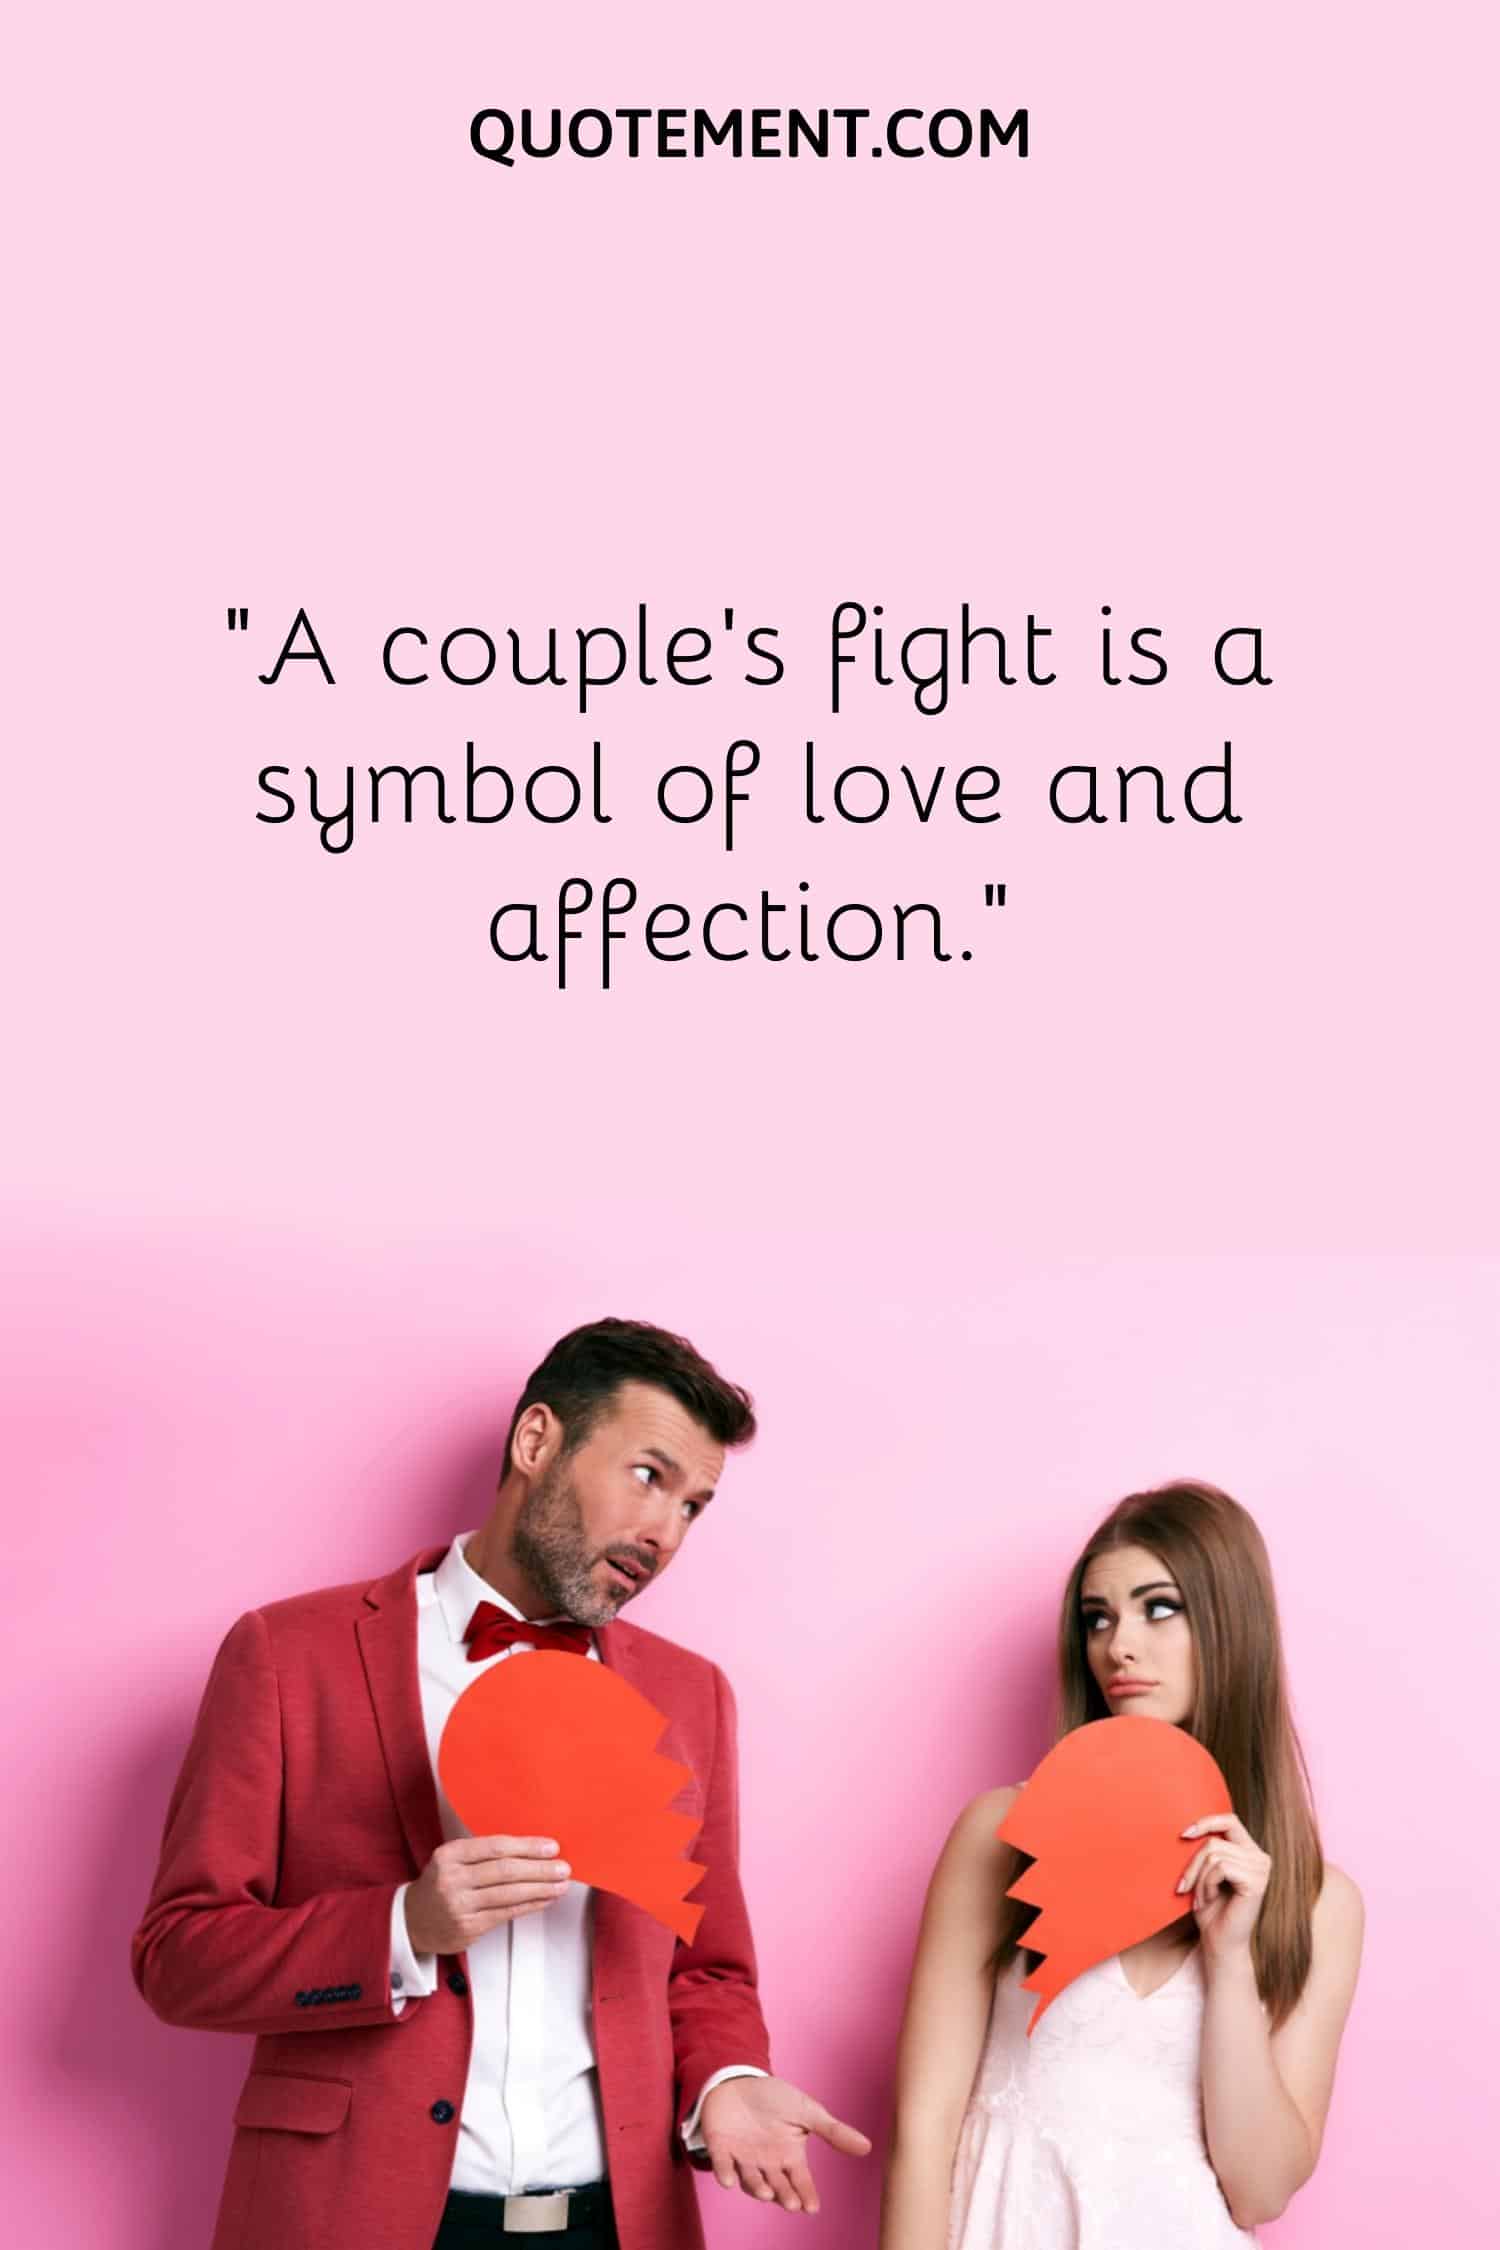 “A couple's fight is a symbol of love and affection.”